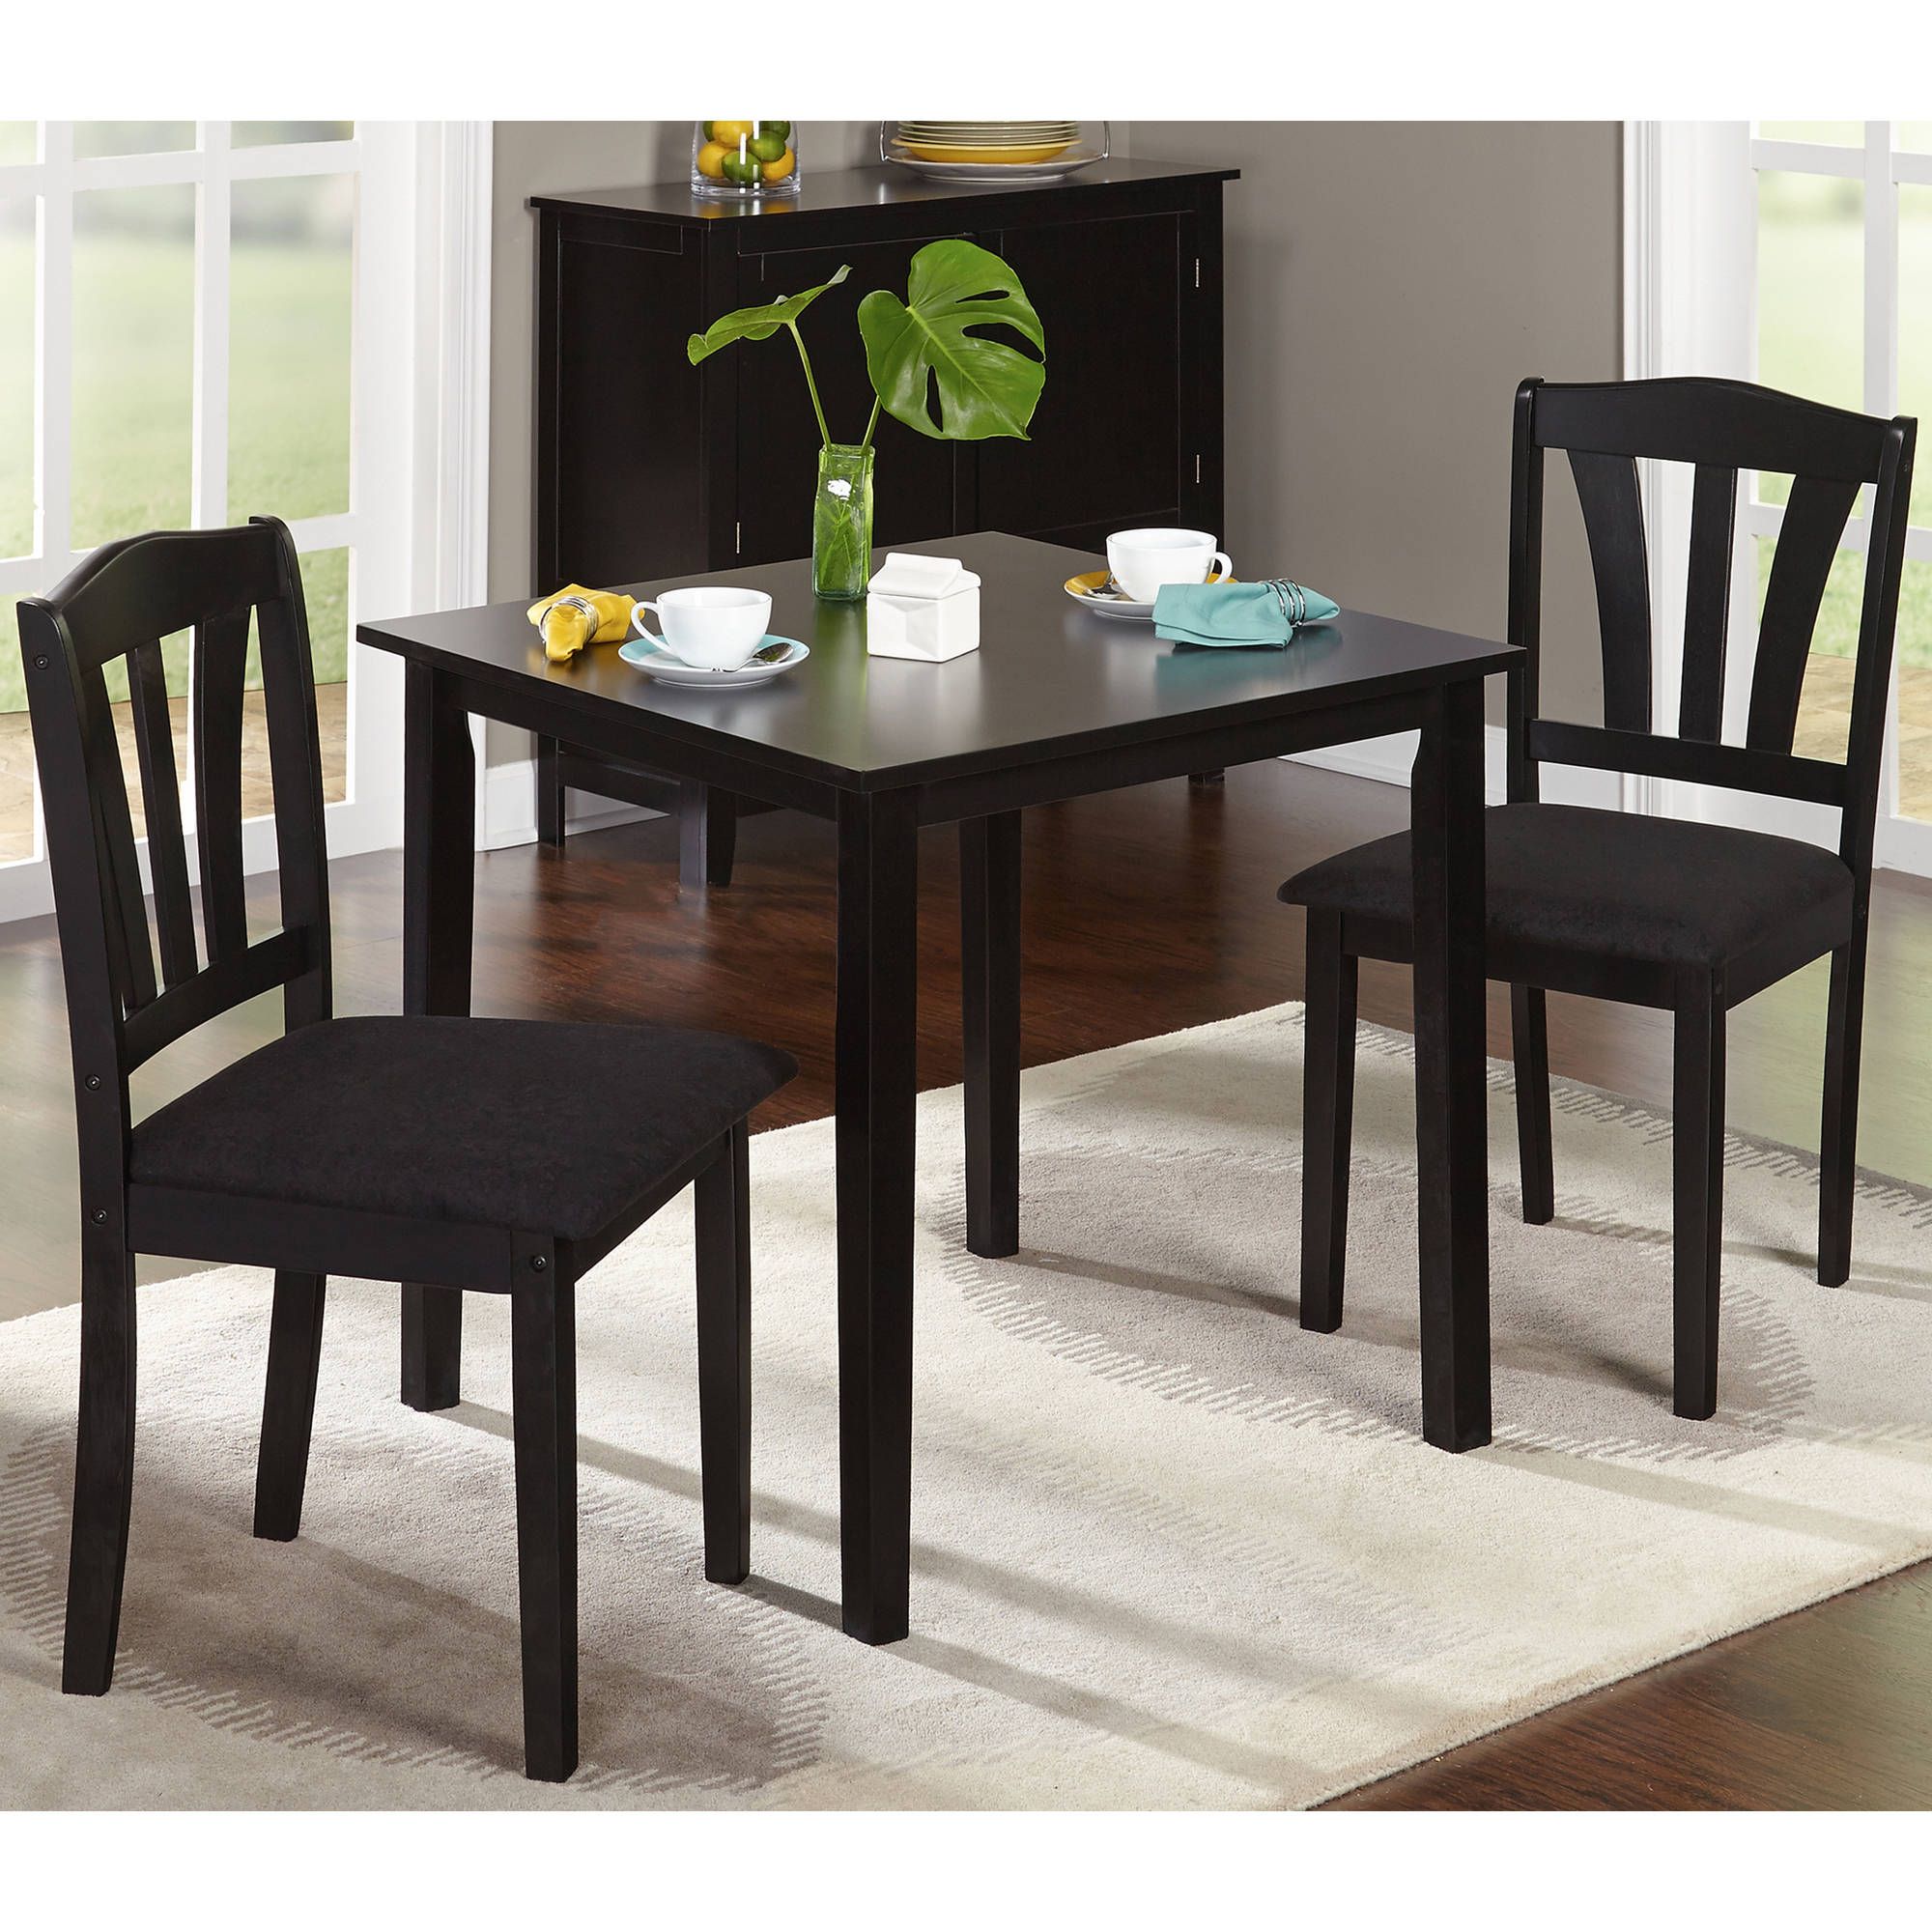 Preferred 3 Piece Dining Sets Regarding Metropolitan 3 Piece Dining Set, Multiple Finishes (View 1 of 20)